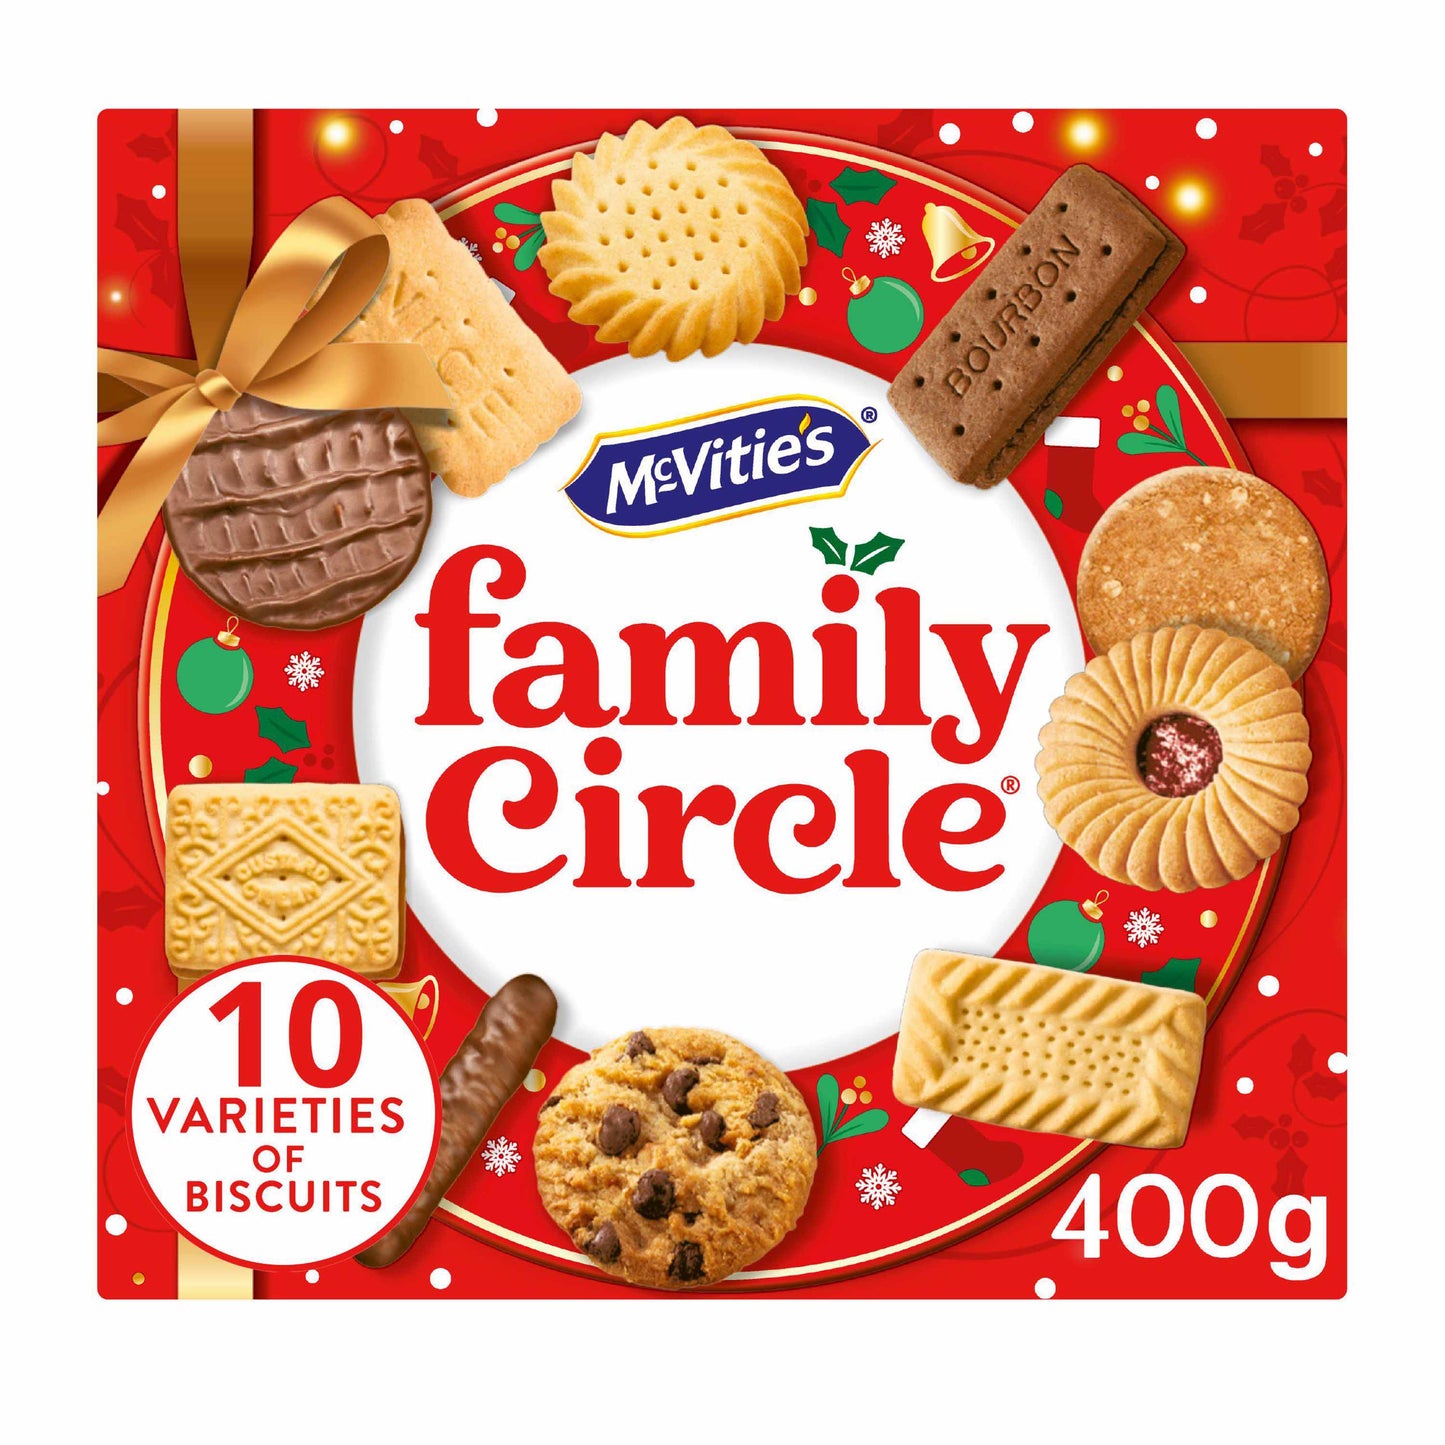 McVitie's Family Circle Biscuit Selection Variety Assortment 400g - British Snacks Gift Boxes